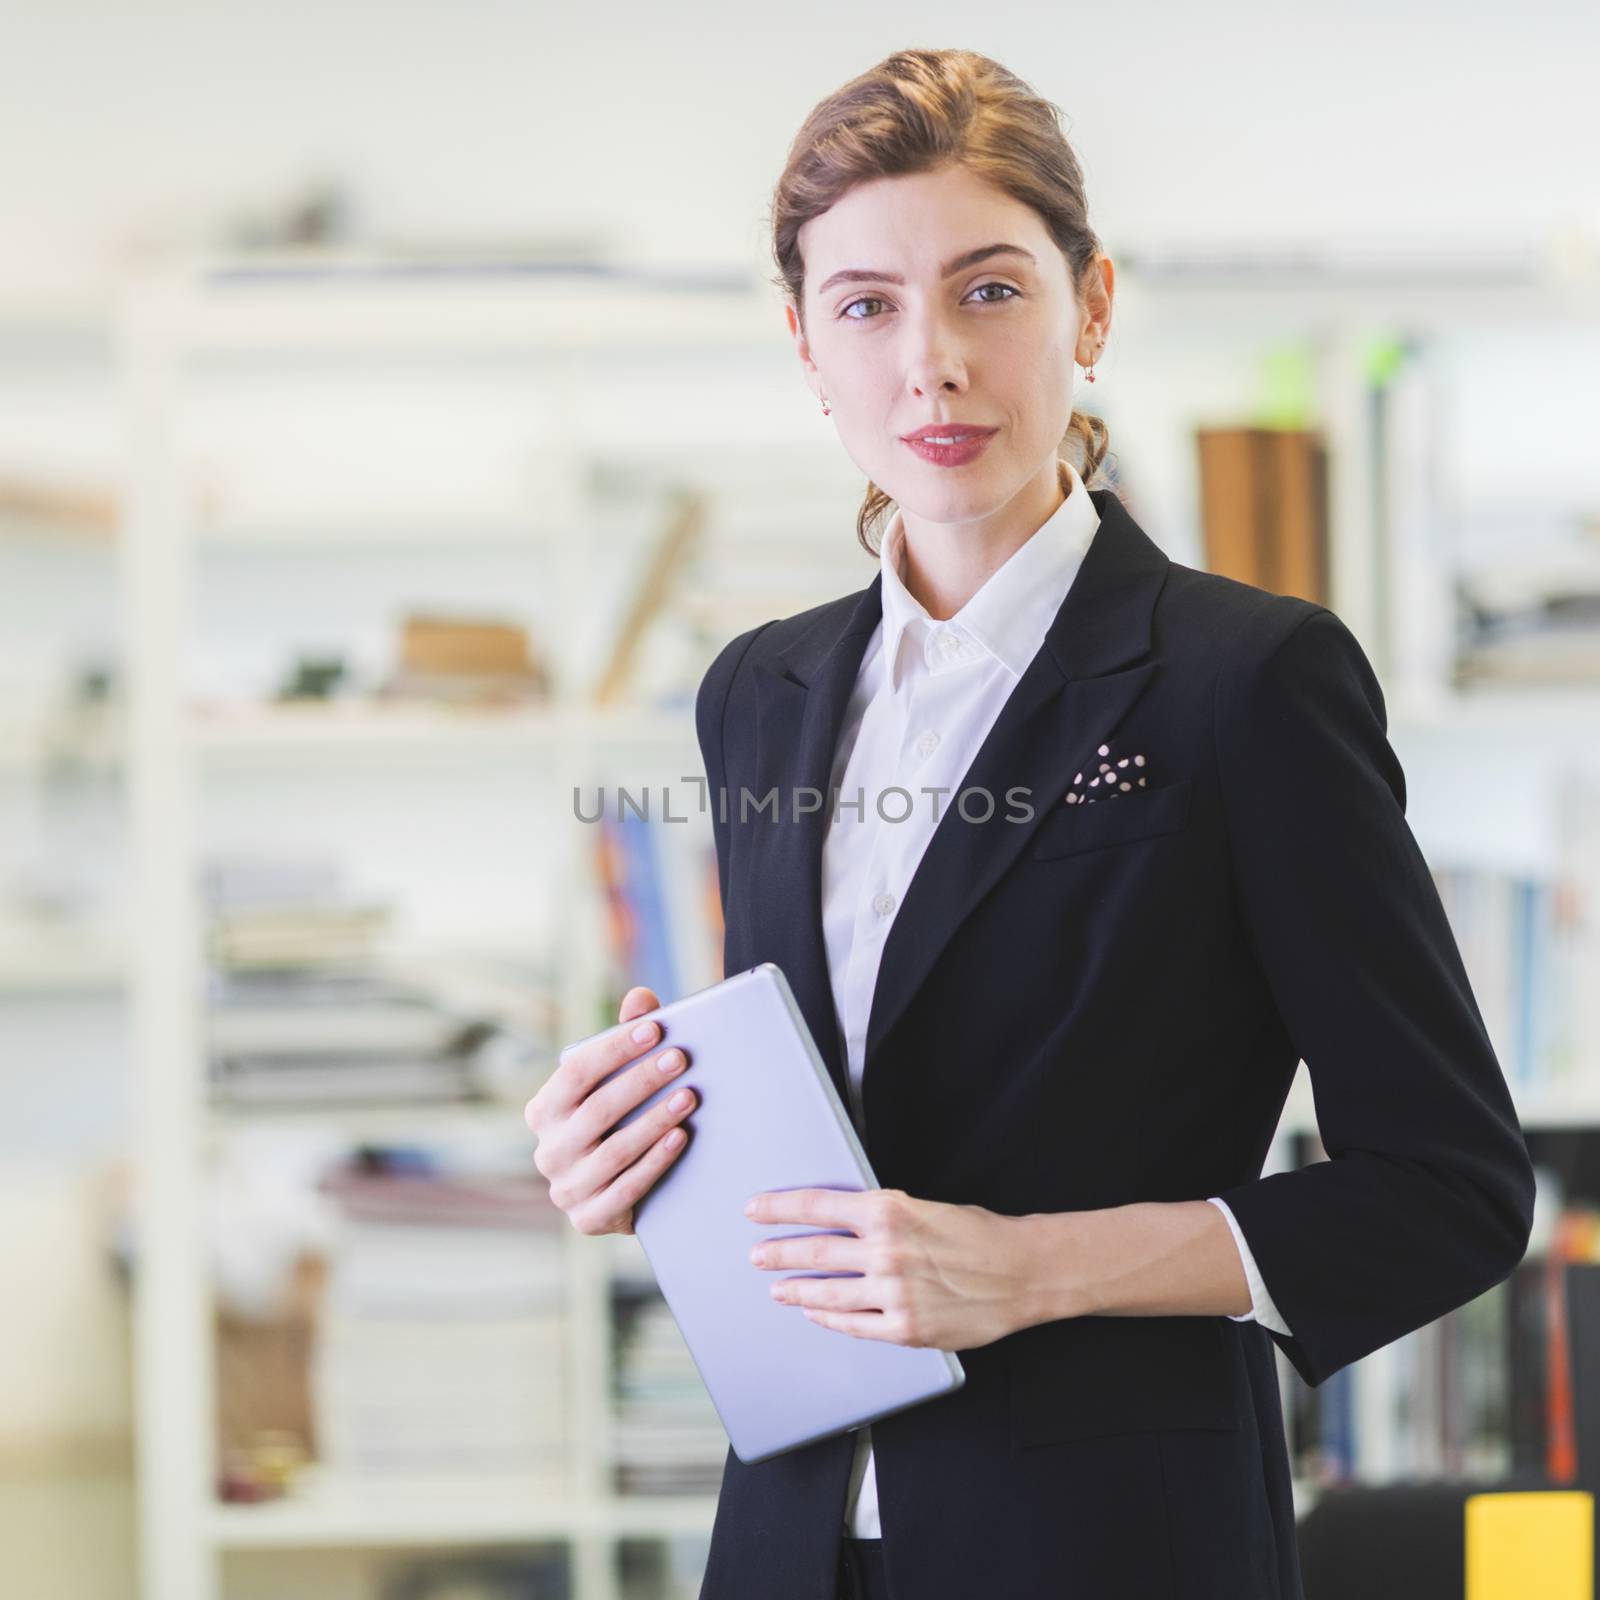 Portrait of businesswoman with digital tablet in office